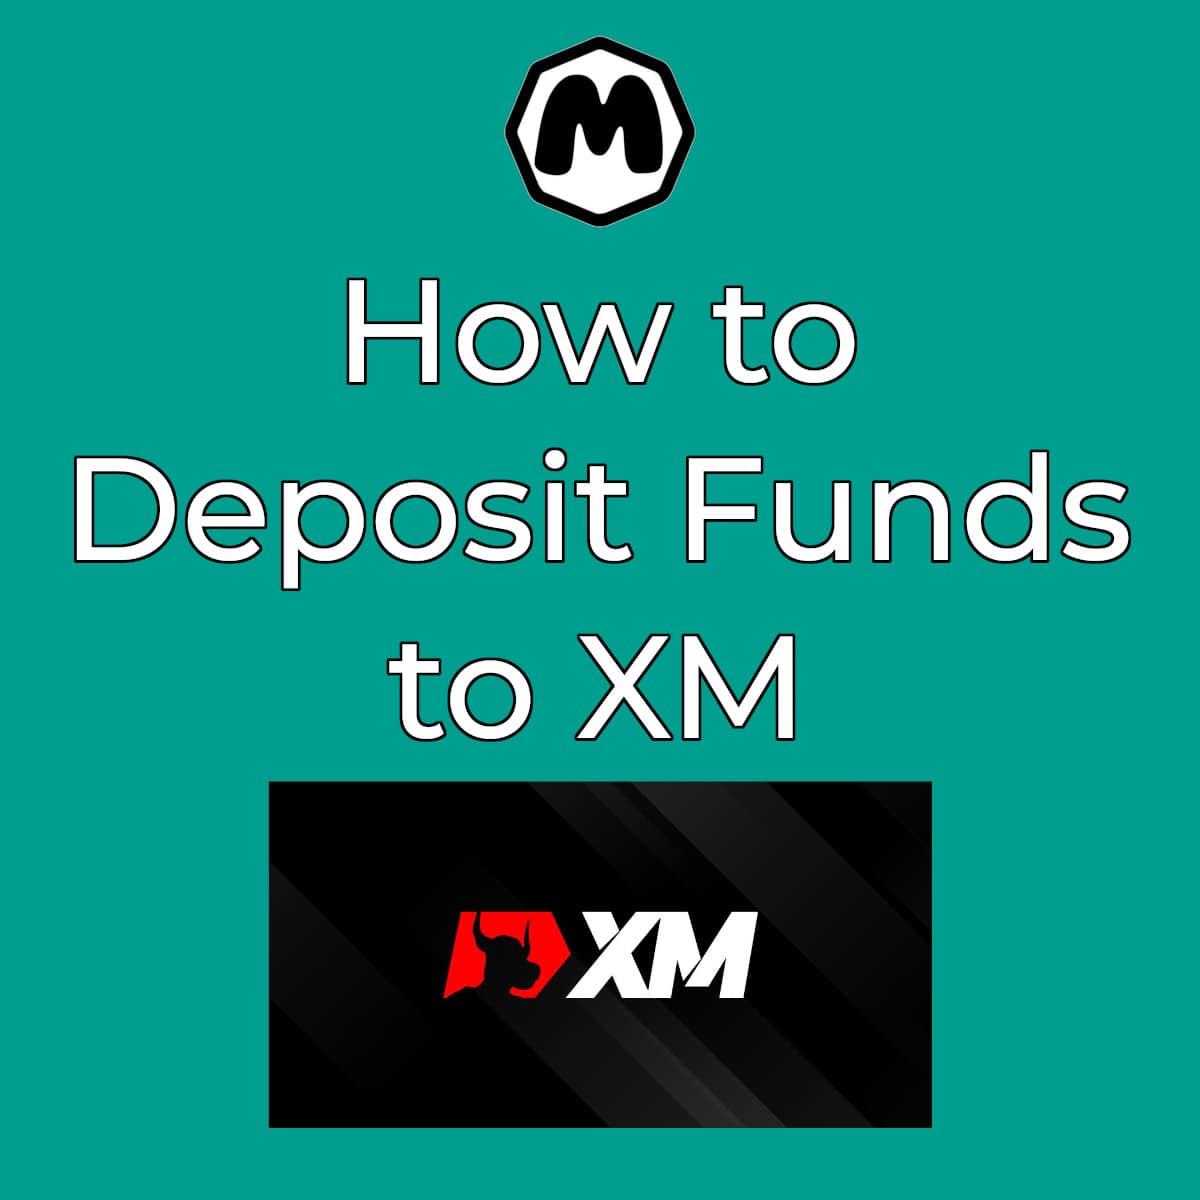 How to Deposit Funds to XM